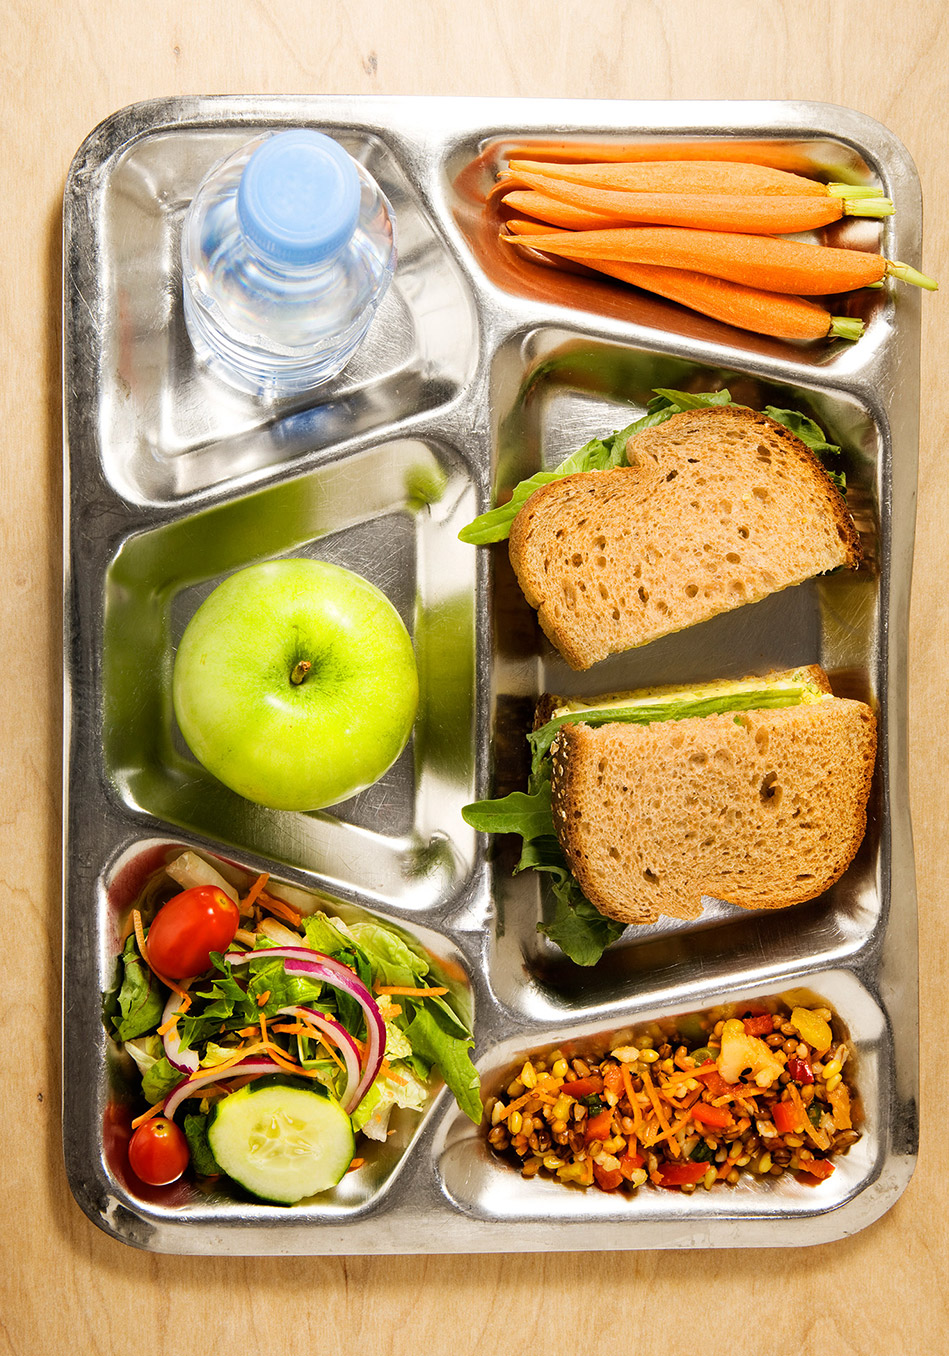 Are Healthier Lunches Beneficial